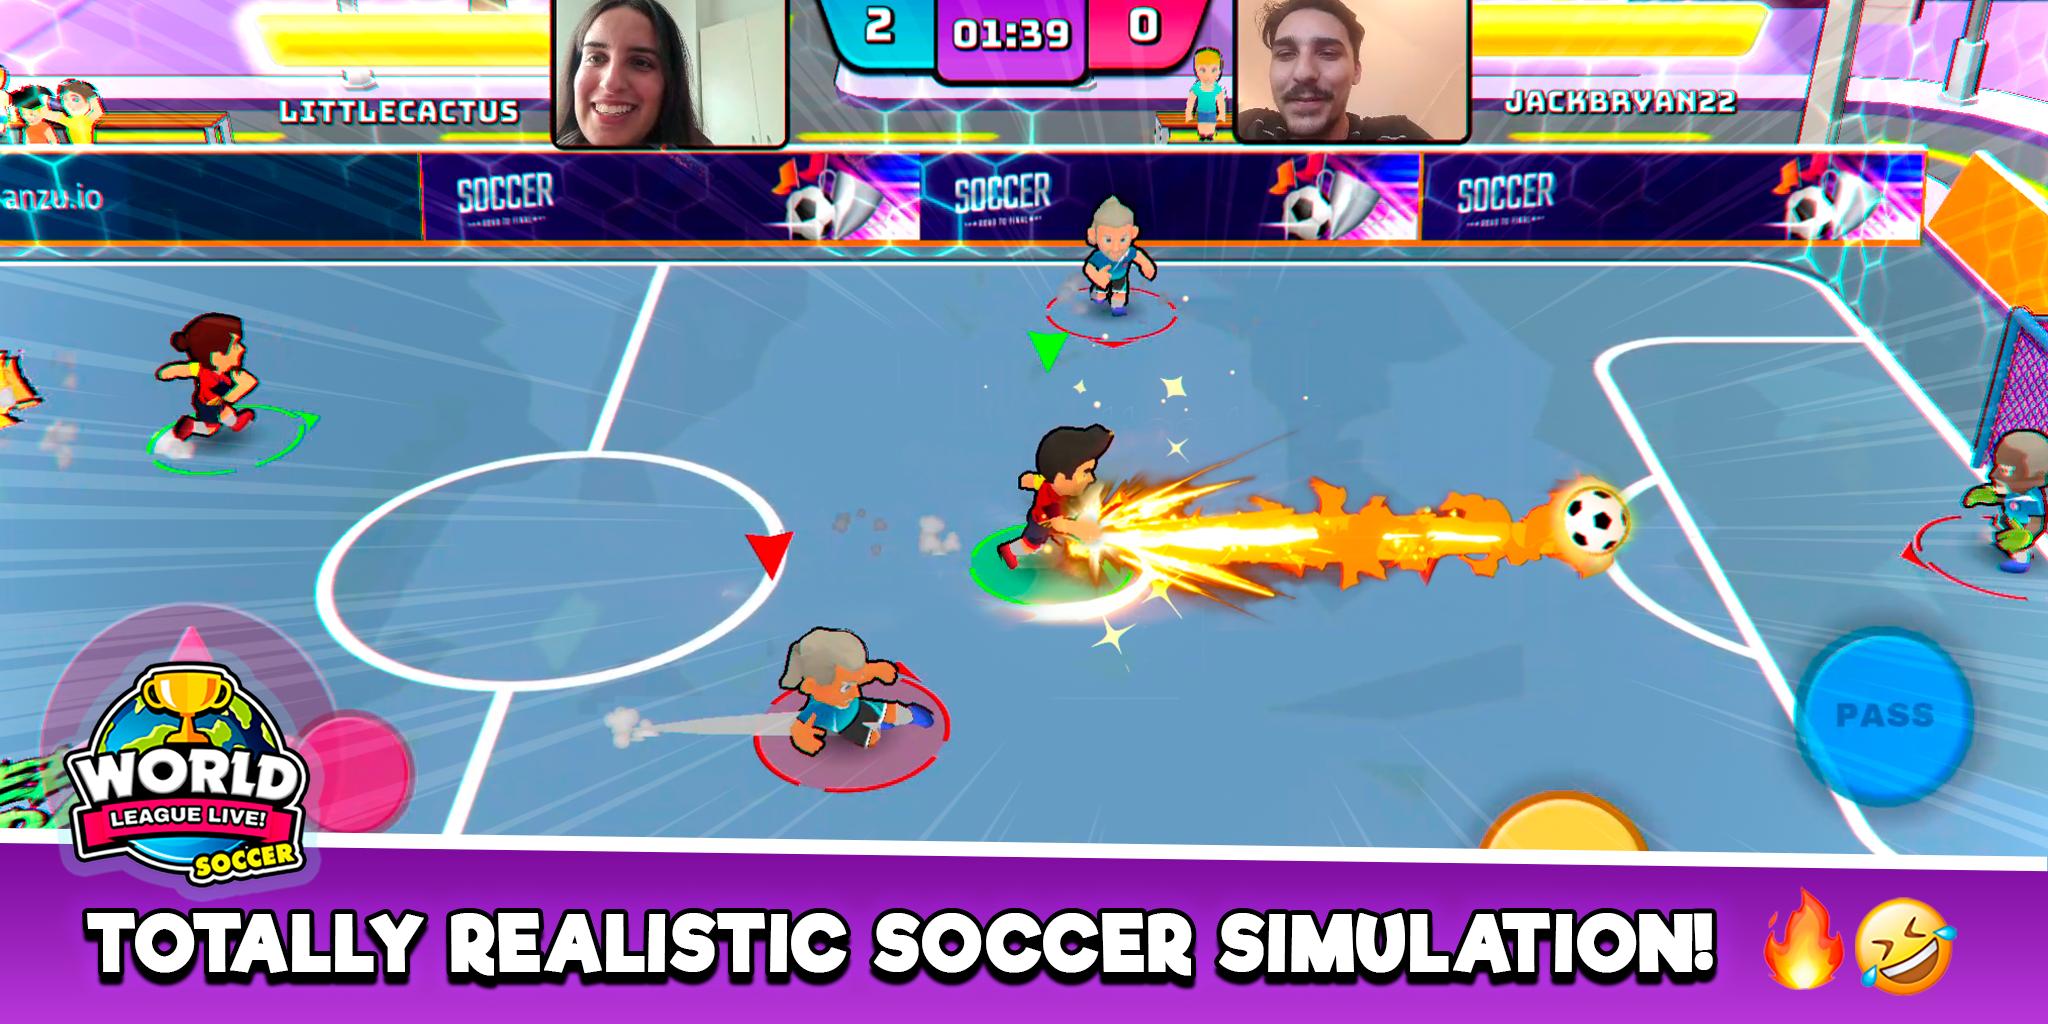 World League Live! Football for Android - APK Download